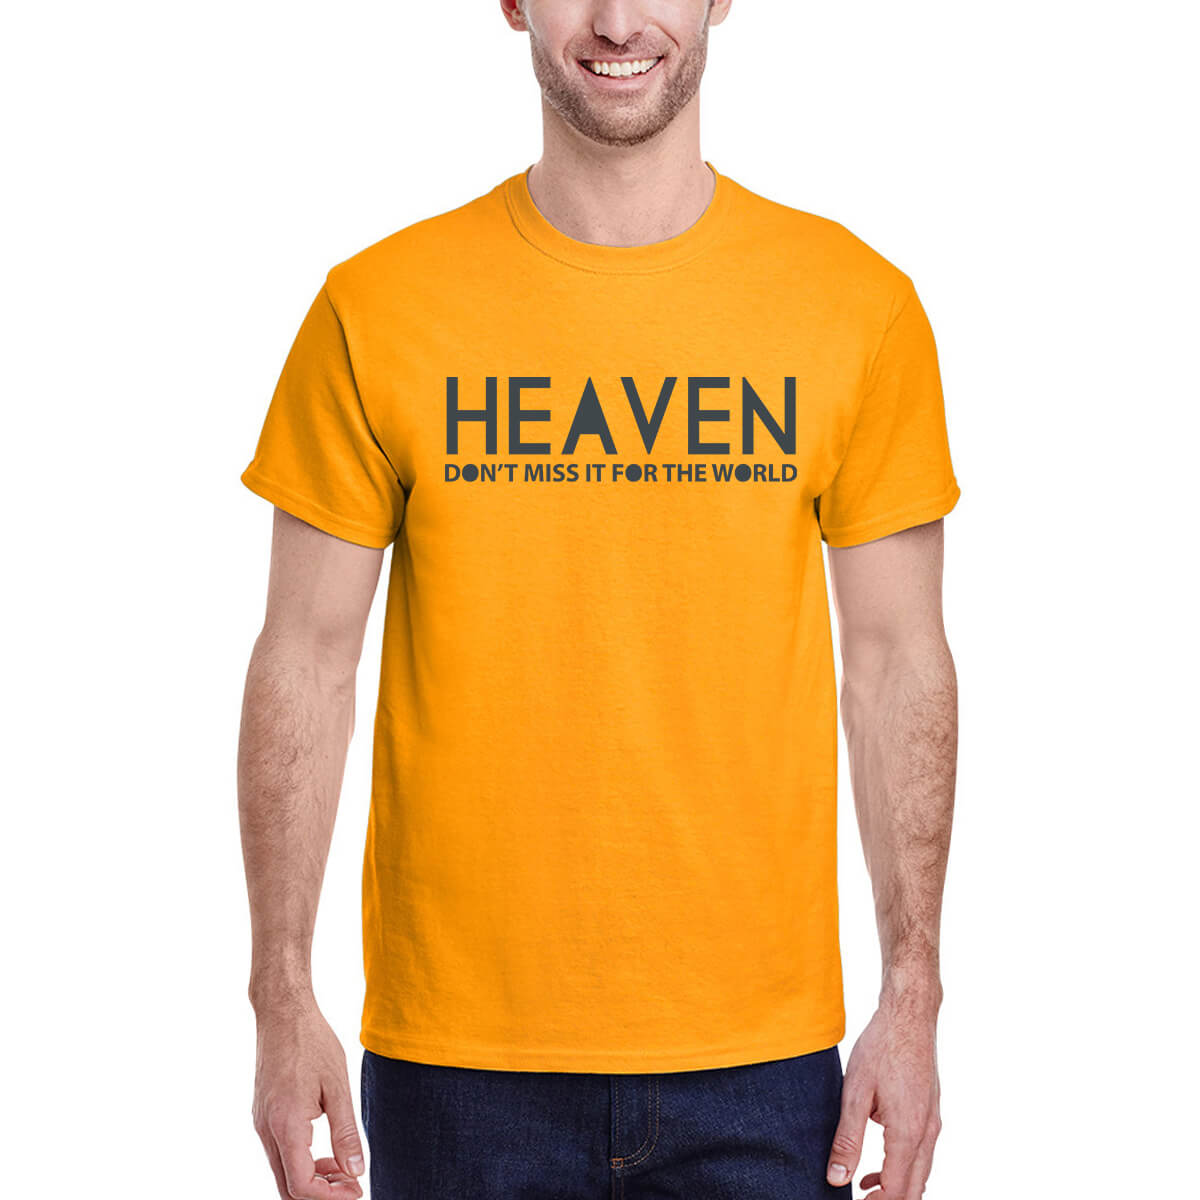 Heaven Don't Miss It For The World Men's T-Shirt